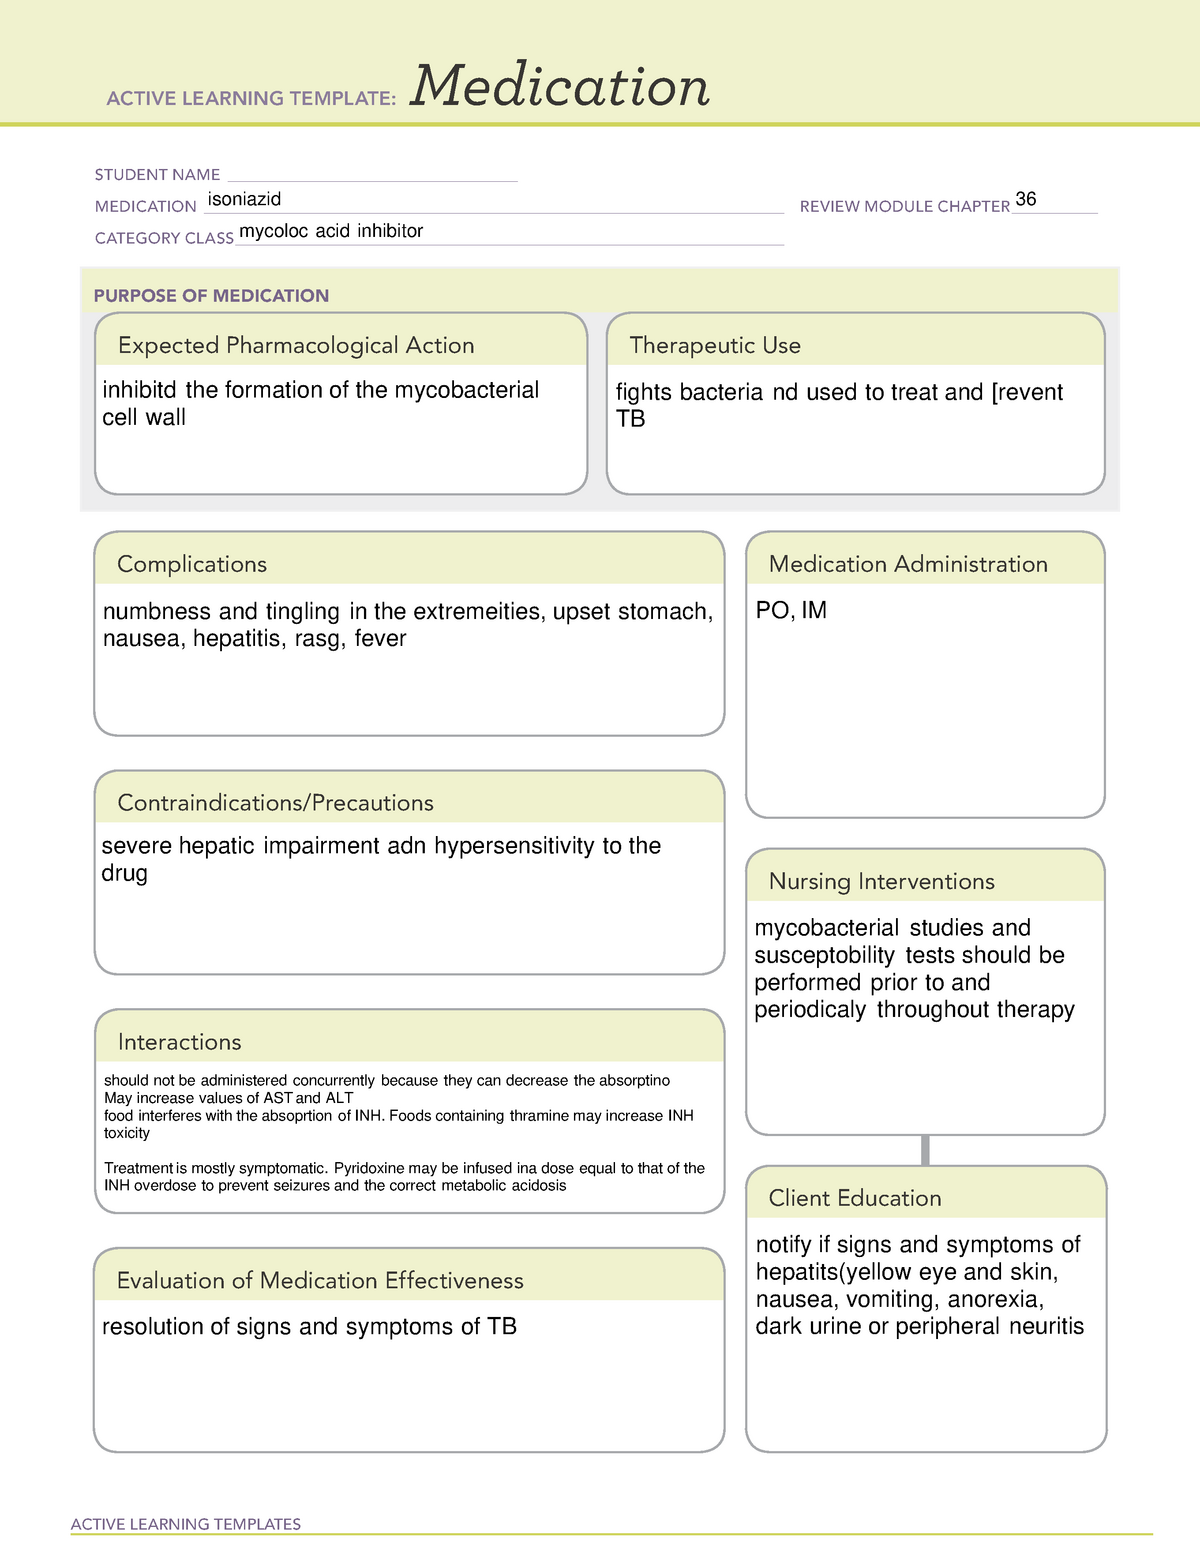 1pharm med temp chap 36 Isoniazid ACTIVE LEARNING TEMPLATES